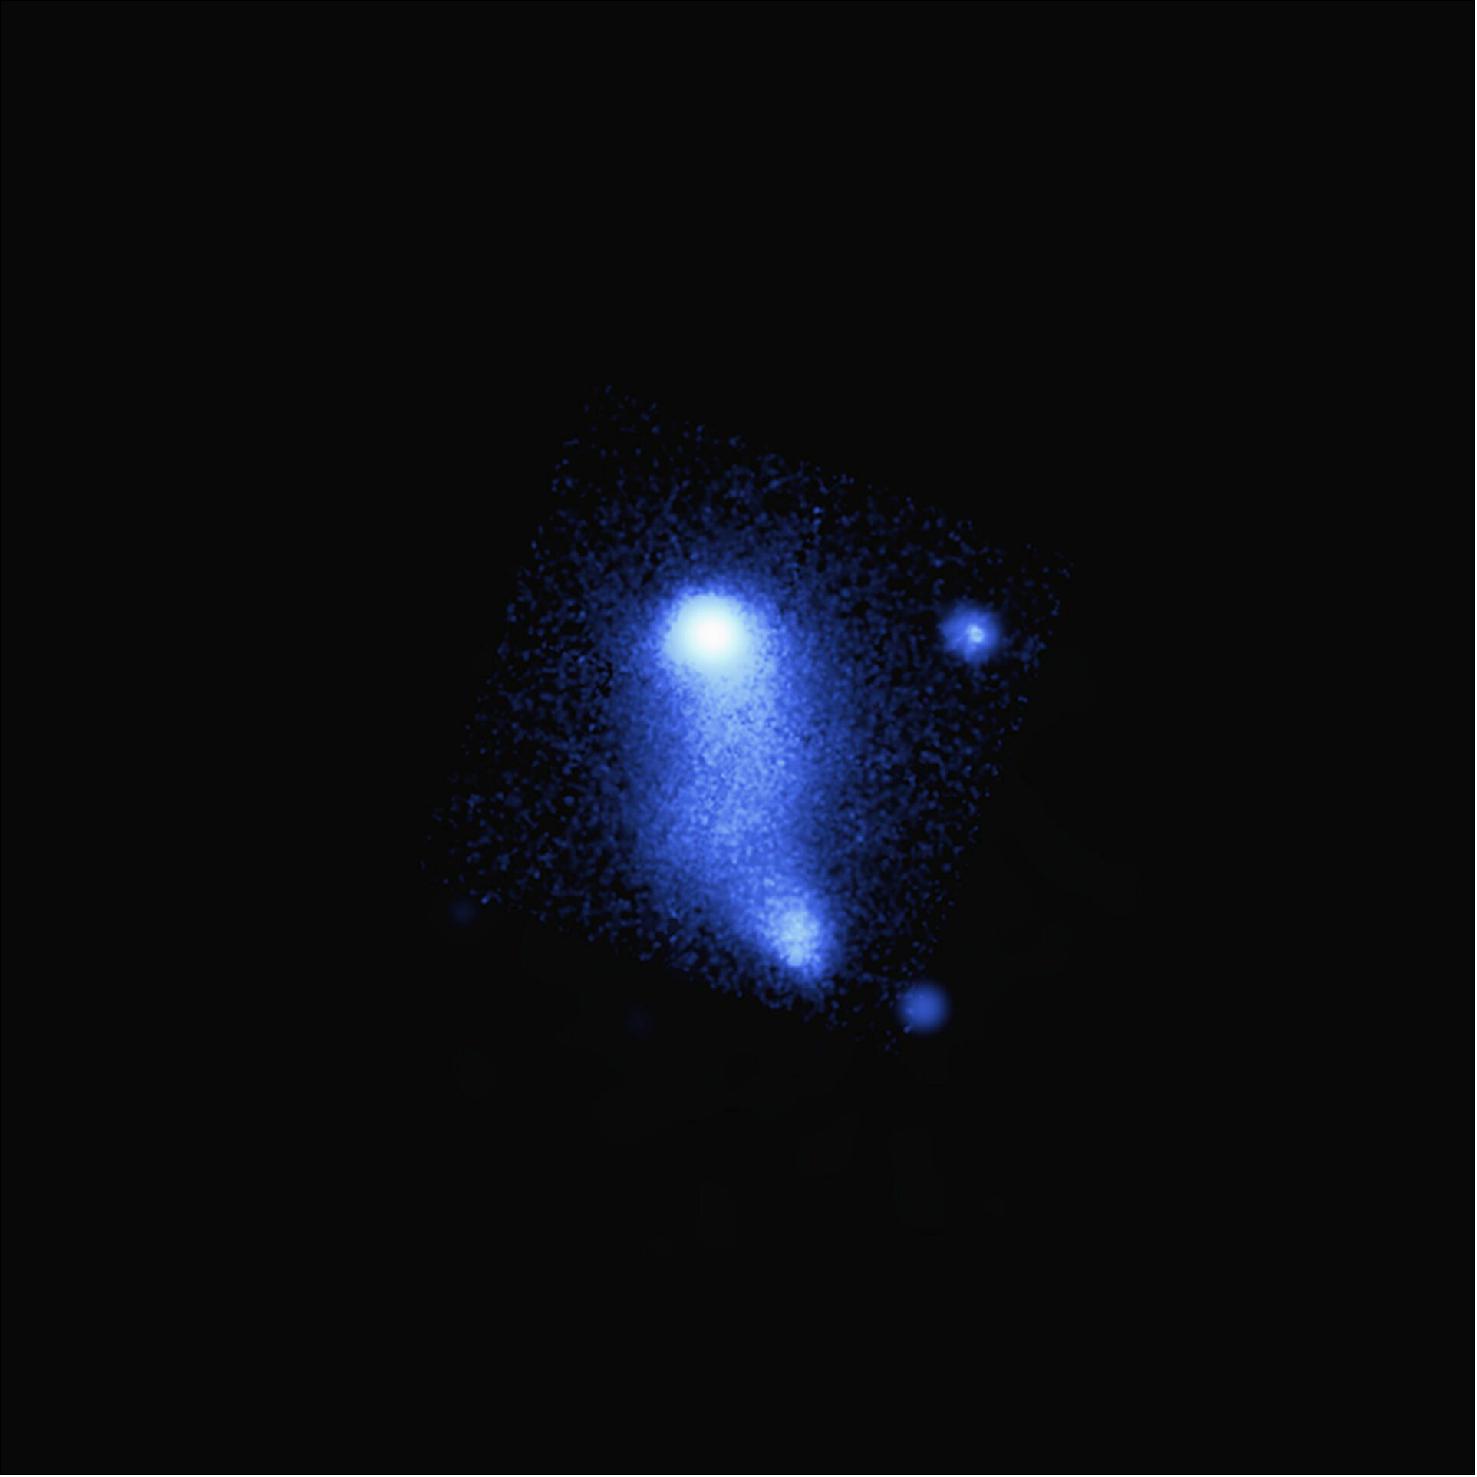 Figure 35: An X-ray view of the Abell 2384 system. The image is based on data from ESA's XMM-Newton and NASA's Chandra X-ray observatories (image credit: X-ray: NASA/CXC/SAO/V. Parekh, et al. & ESA/XMM-Newton; Radio: NCRA/GMRT)